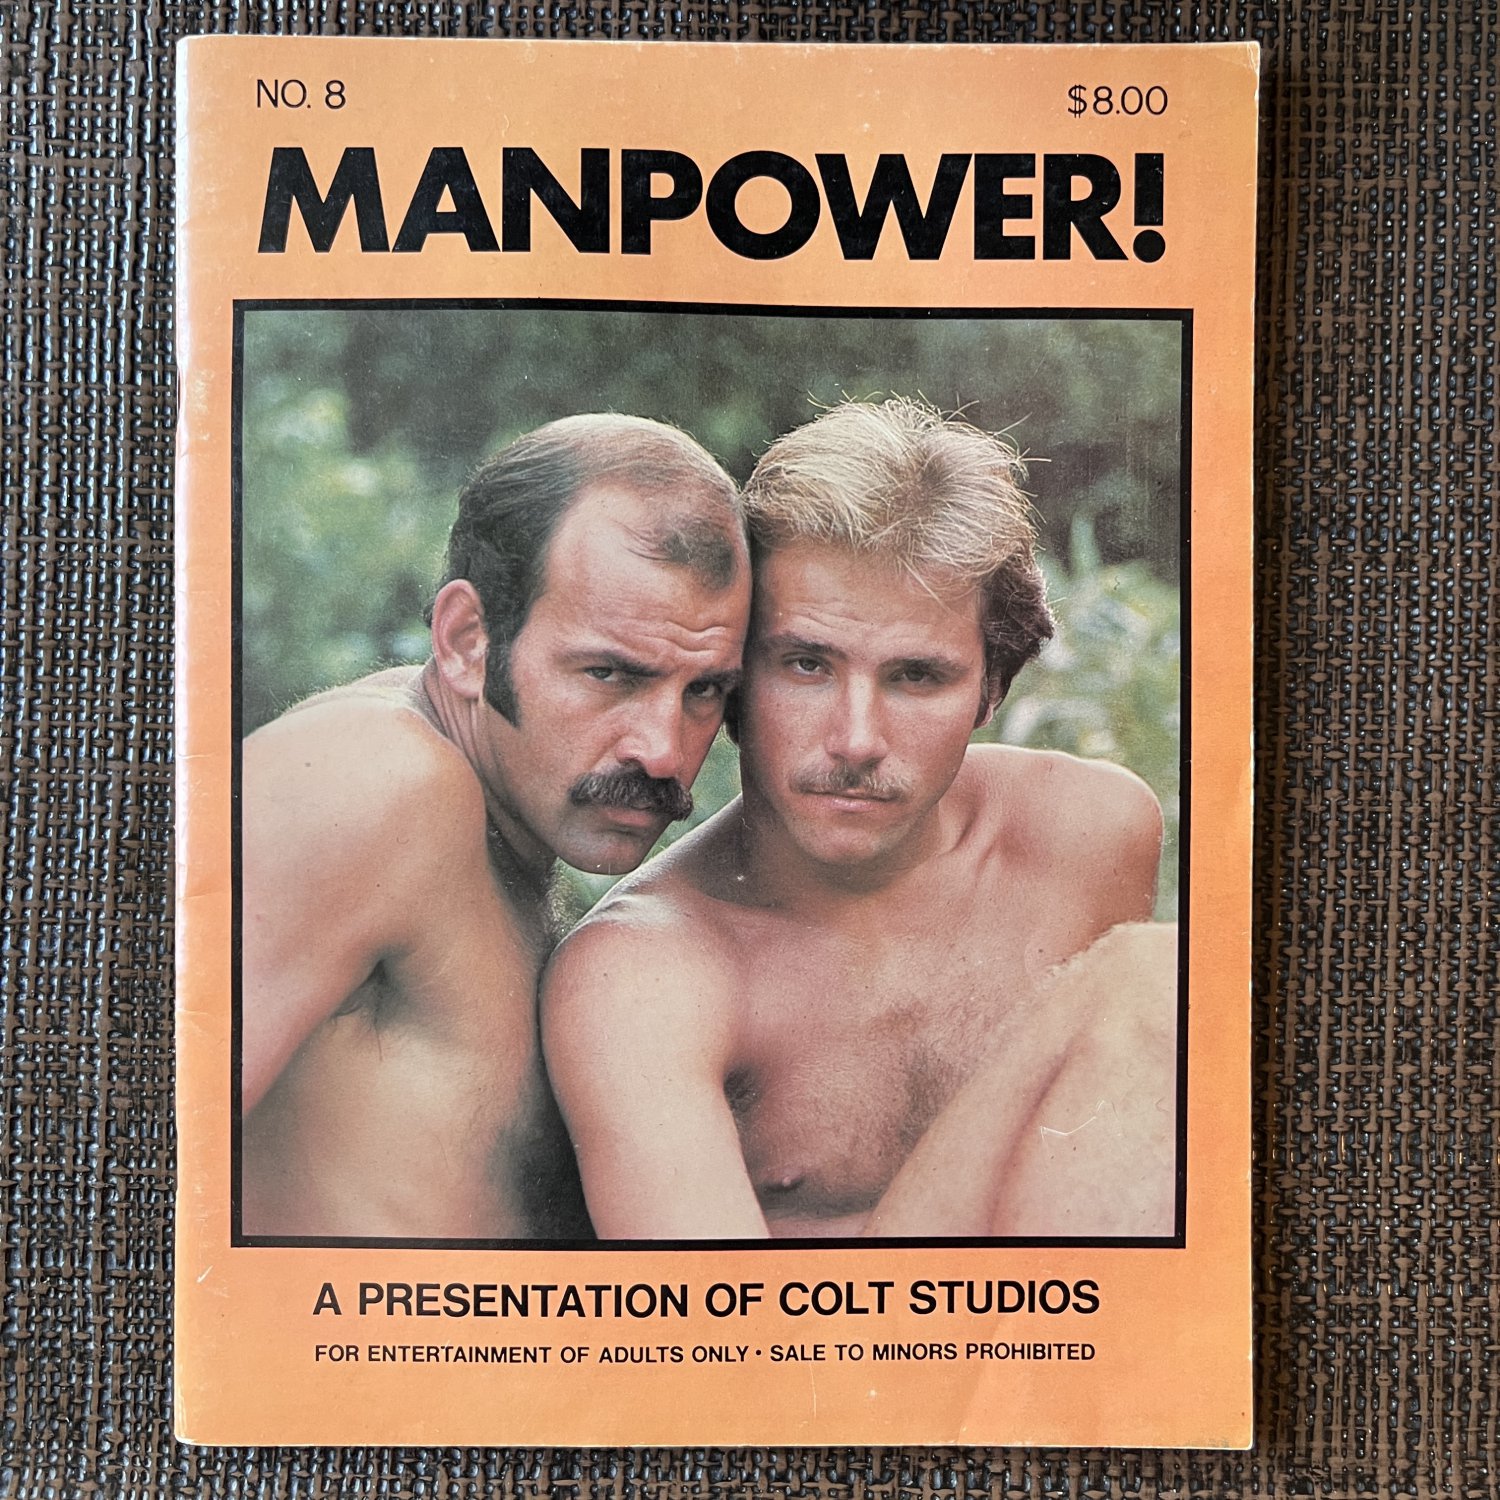 COLT MANPOWER #8 (1975) Gay Uncut Vintage Hiking Camping Male Masculine Nude Muscle Beefcake Art